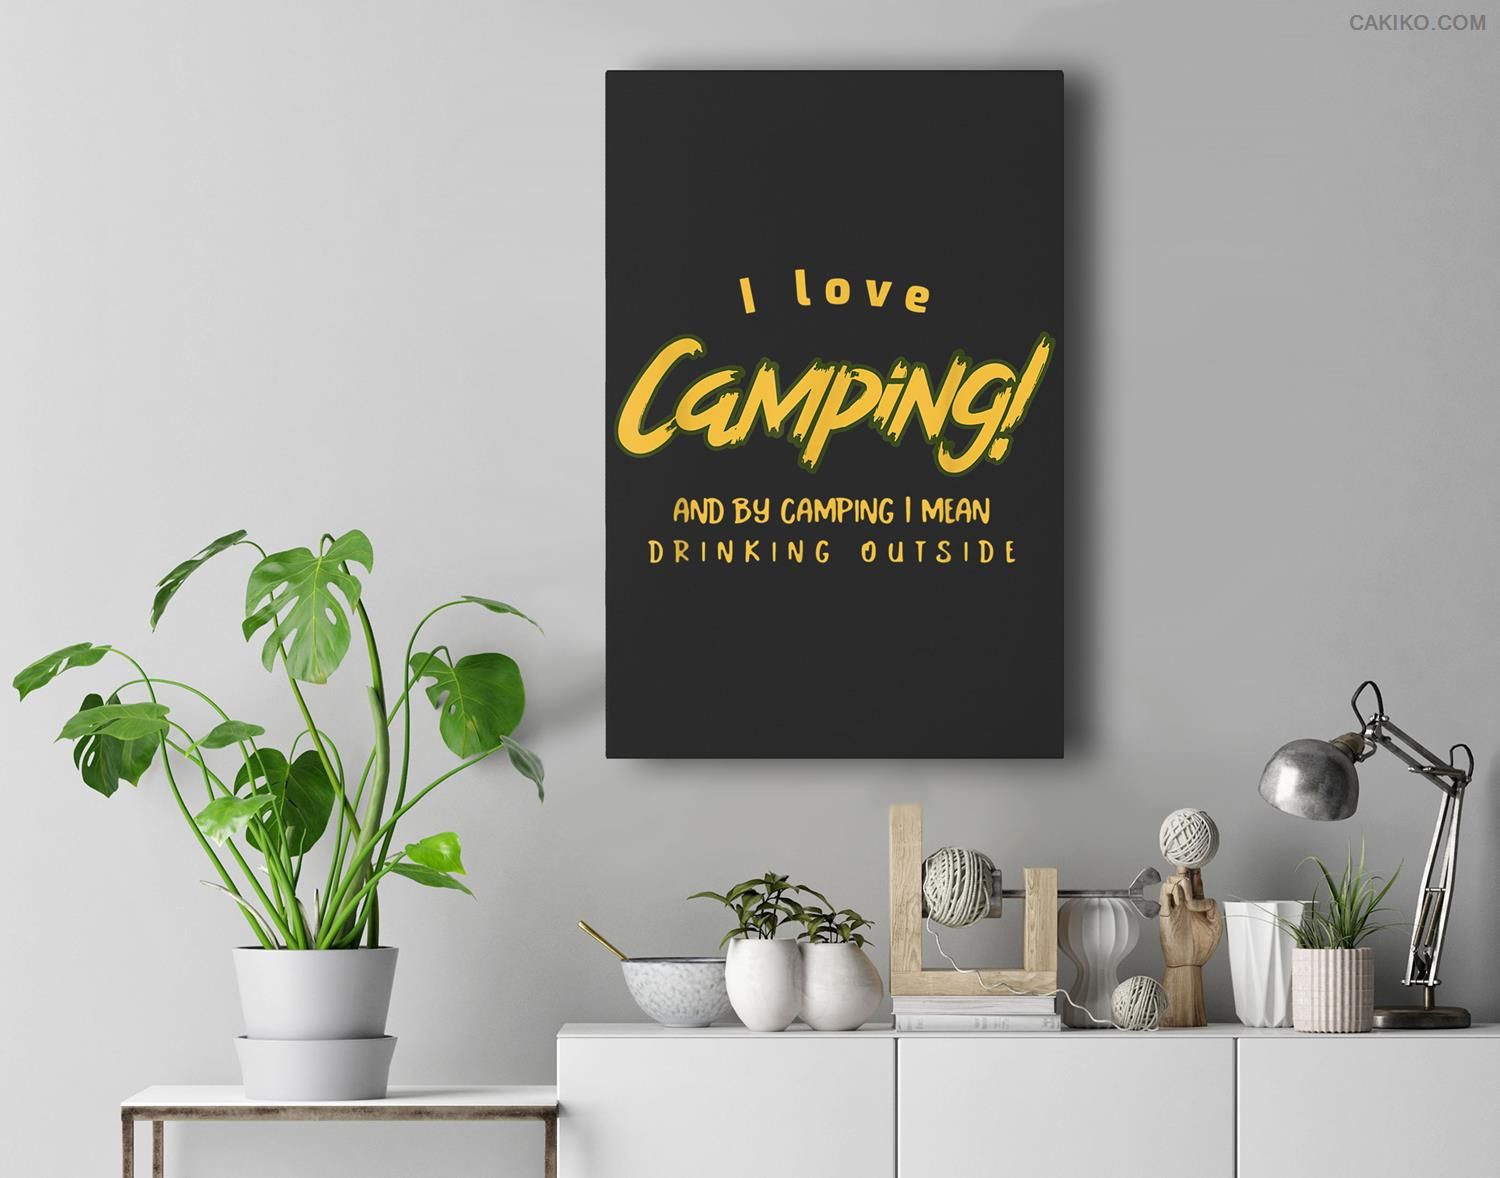 I Love Camping And Drinking Beer With Friends Outside Premium Wall Art Canvas Decor